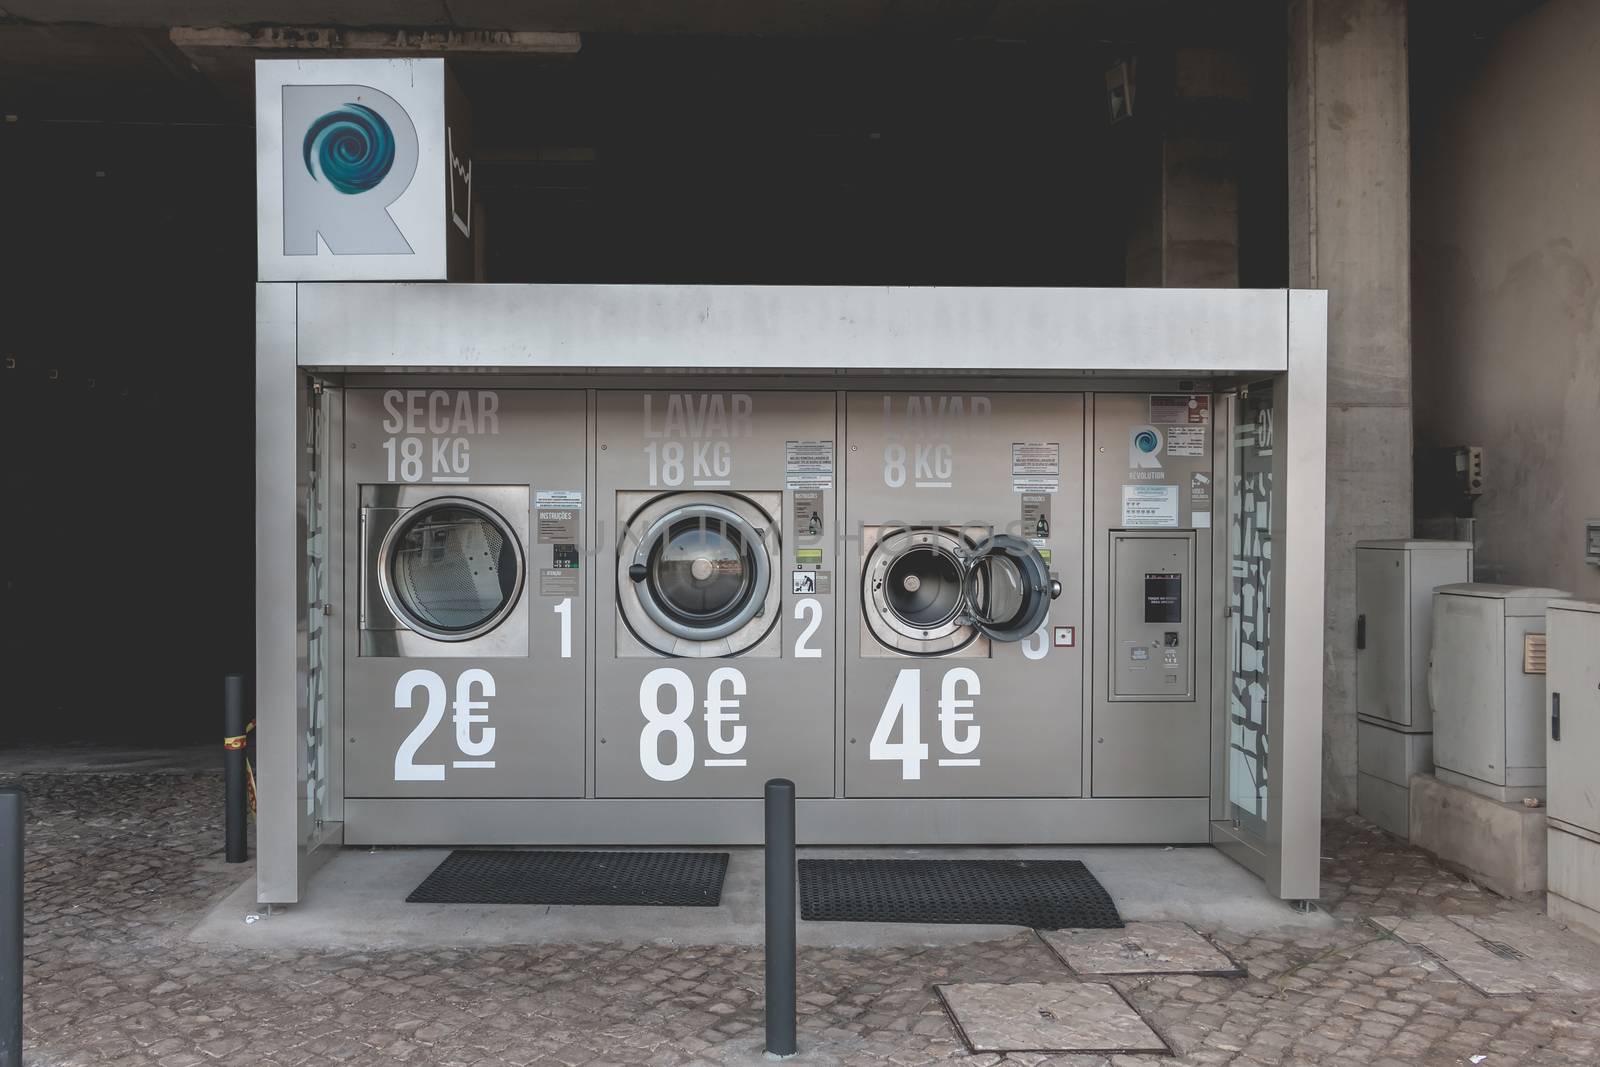 Albufeira, Portugal - May 3, 2018 - View of an automatic public washing machine in the city center on a spring day